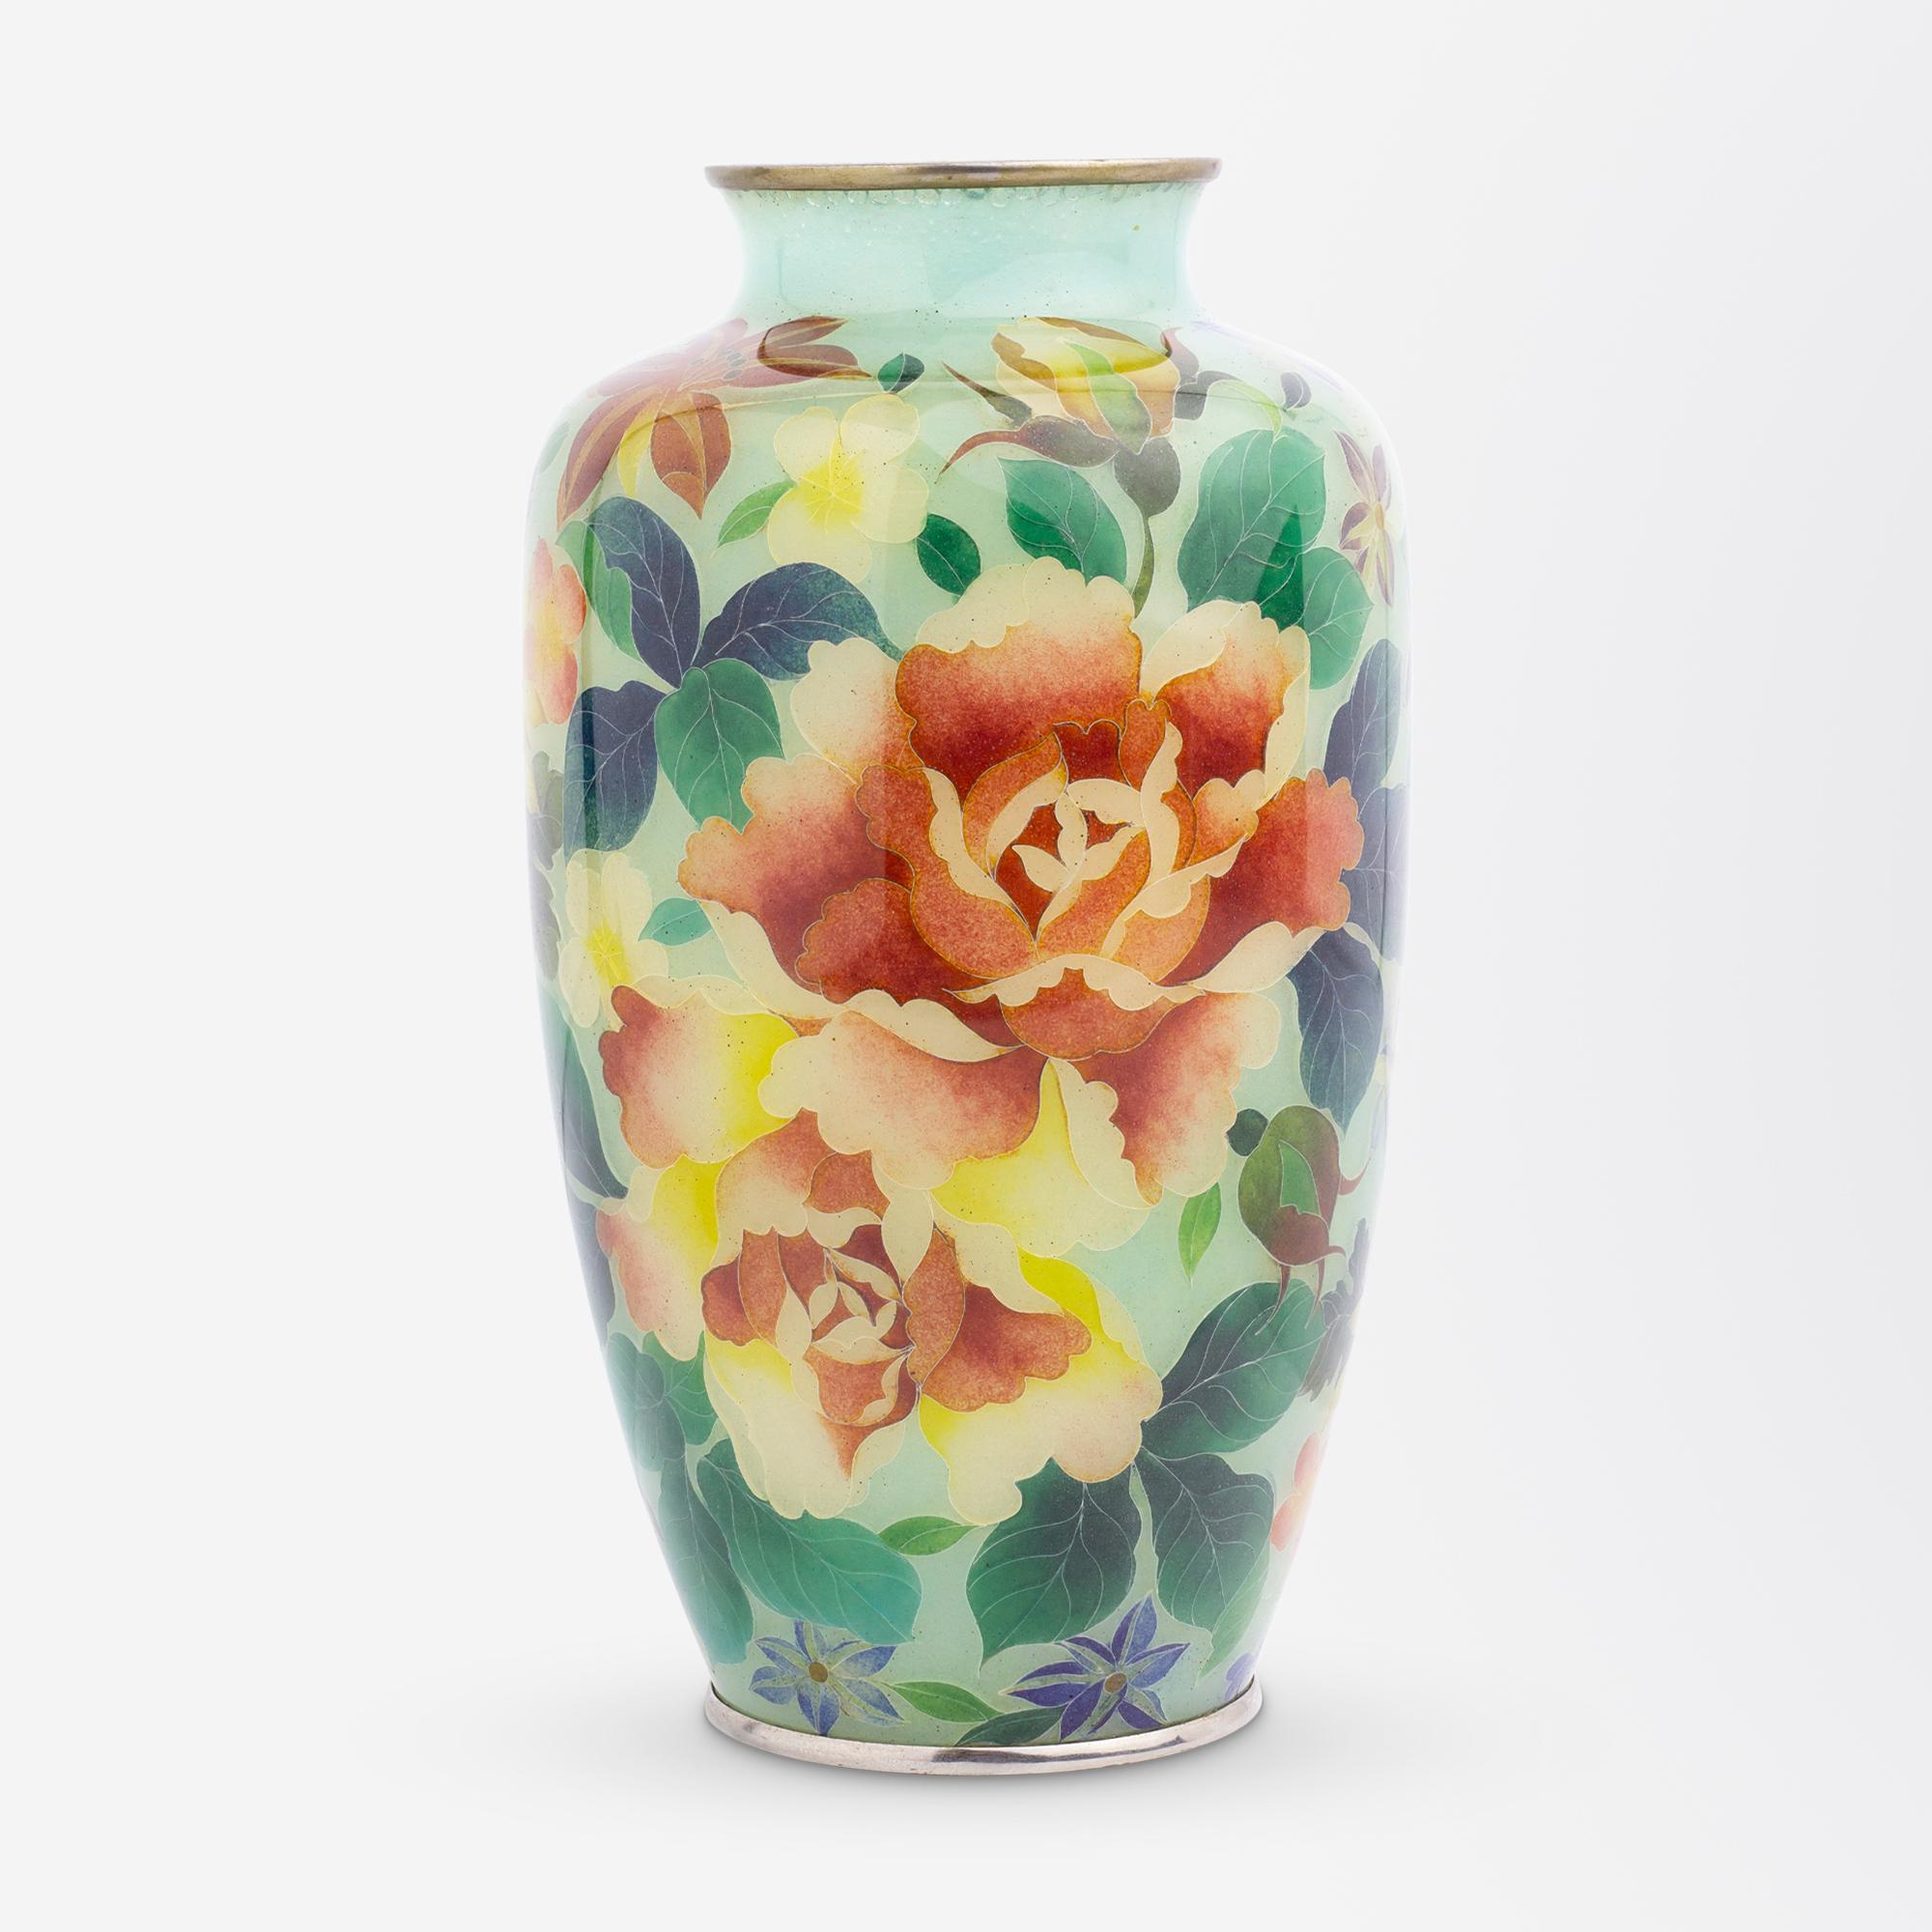 This plique-a-jour cloisonne vase is an exceptional example of Japanese craftsmanship from the tail end of the Meiji period (1868-1912). The most remarkable thing about this delicate vase is that it is in such impeccable condition for its age,